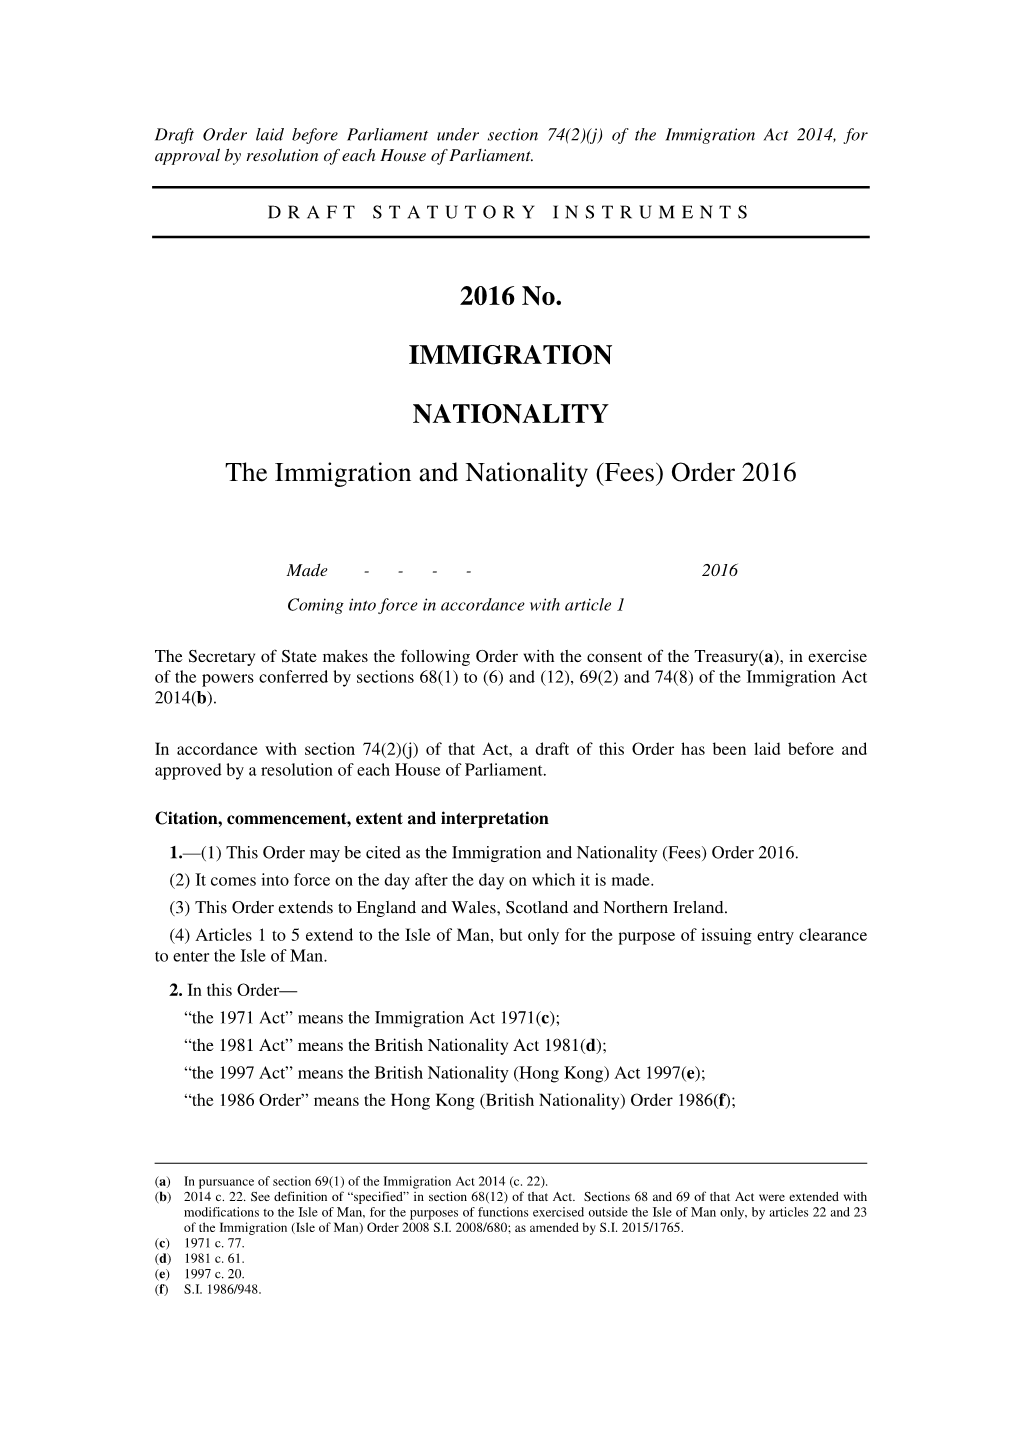 The Immigration and Nationality (Fees) Order 2016